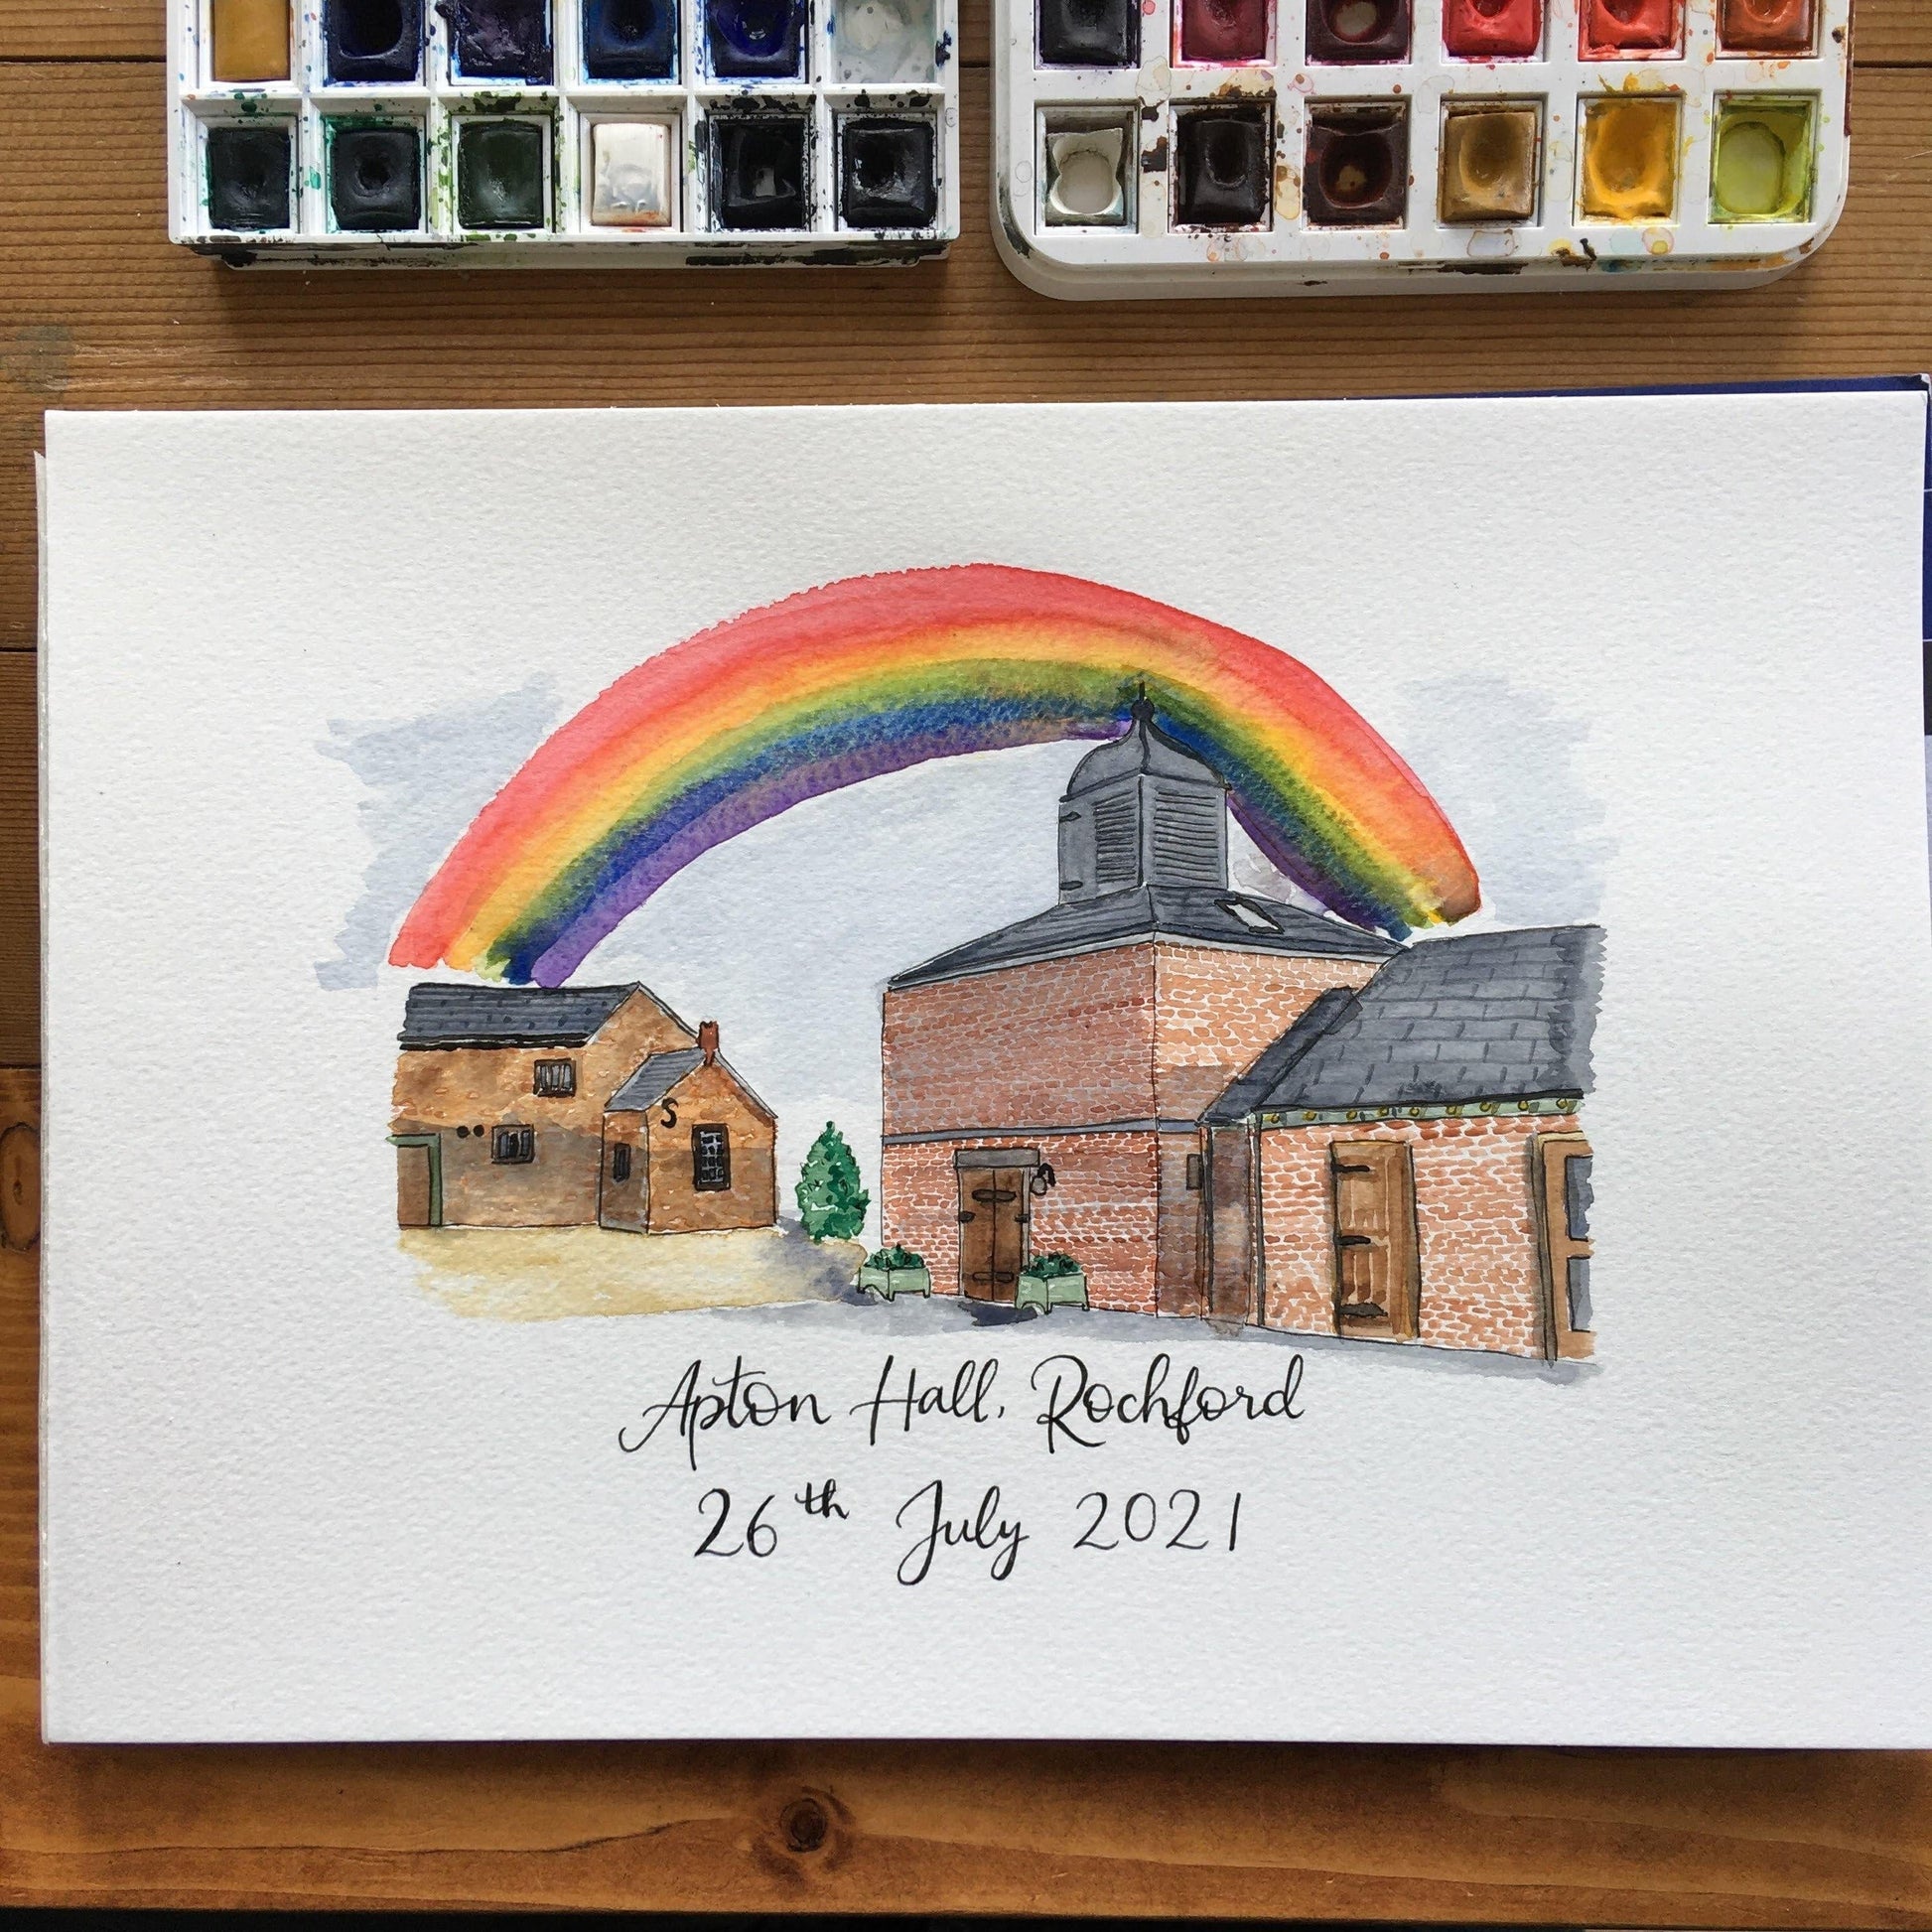 Wedding venue watercolour illustration with hand lettering below of the wedding venue name and date of the wedding. This painting also includes a bright rainbow.